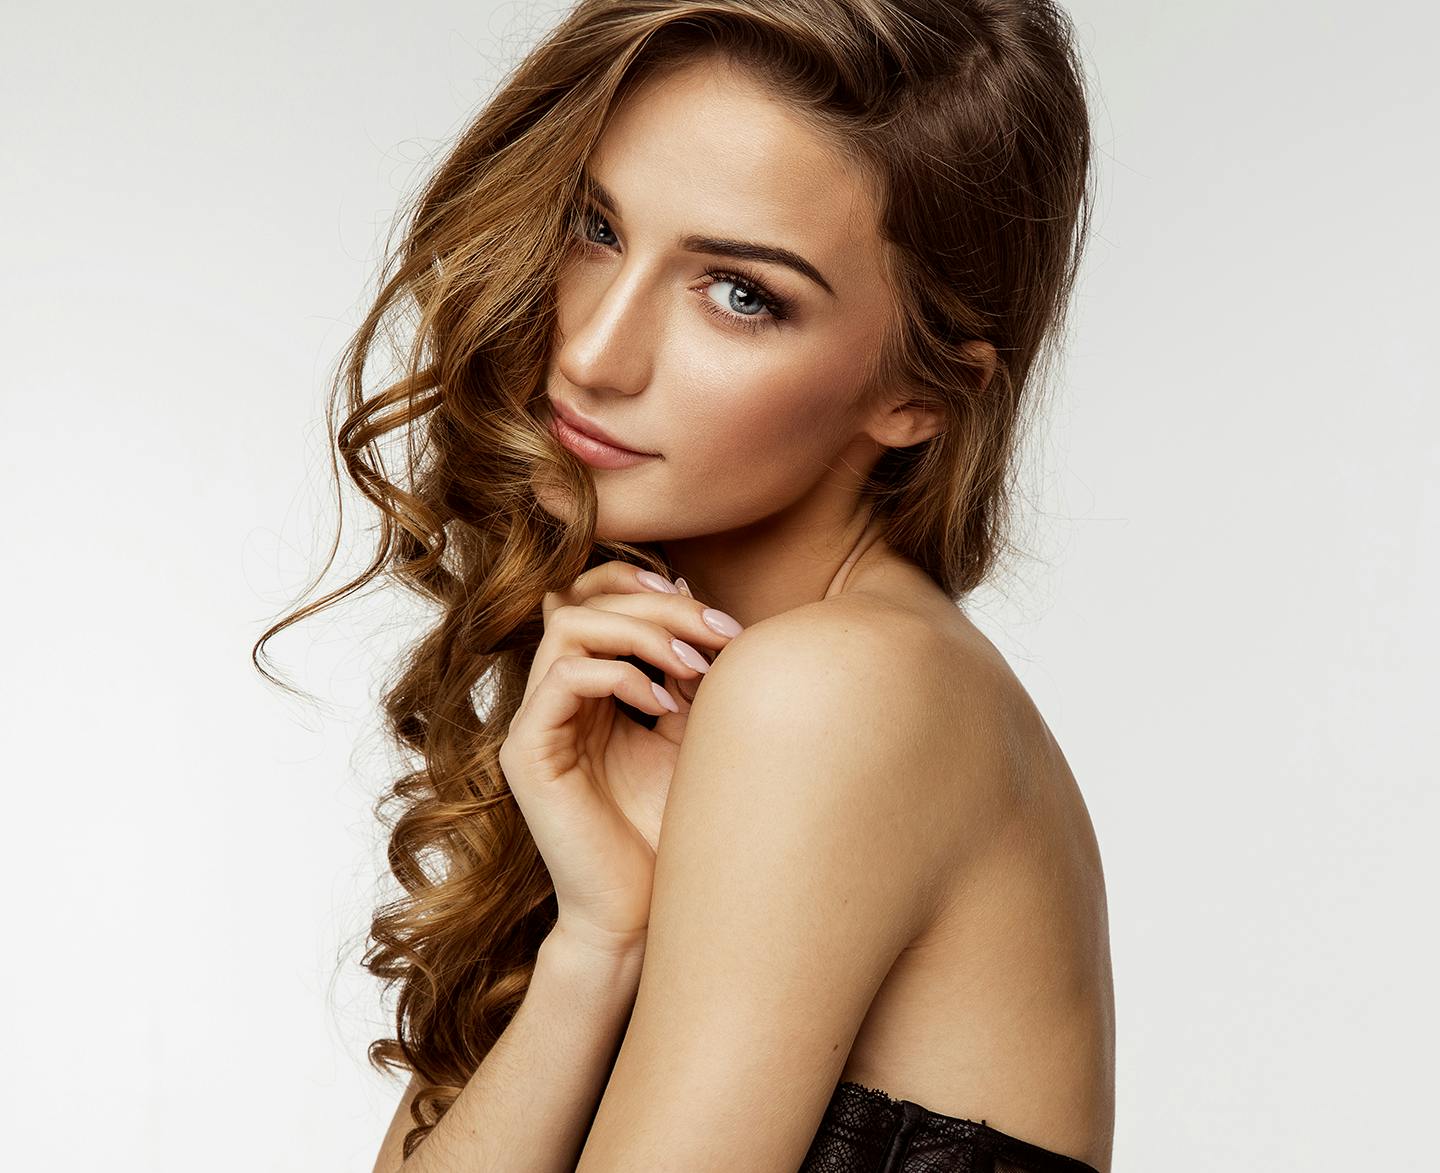 woman with strapless dress on and curly brown hair